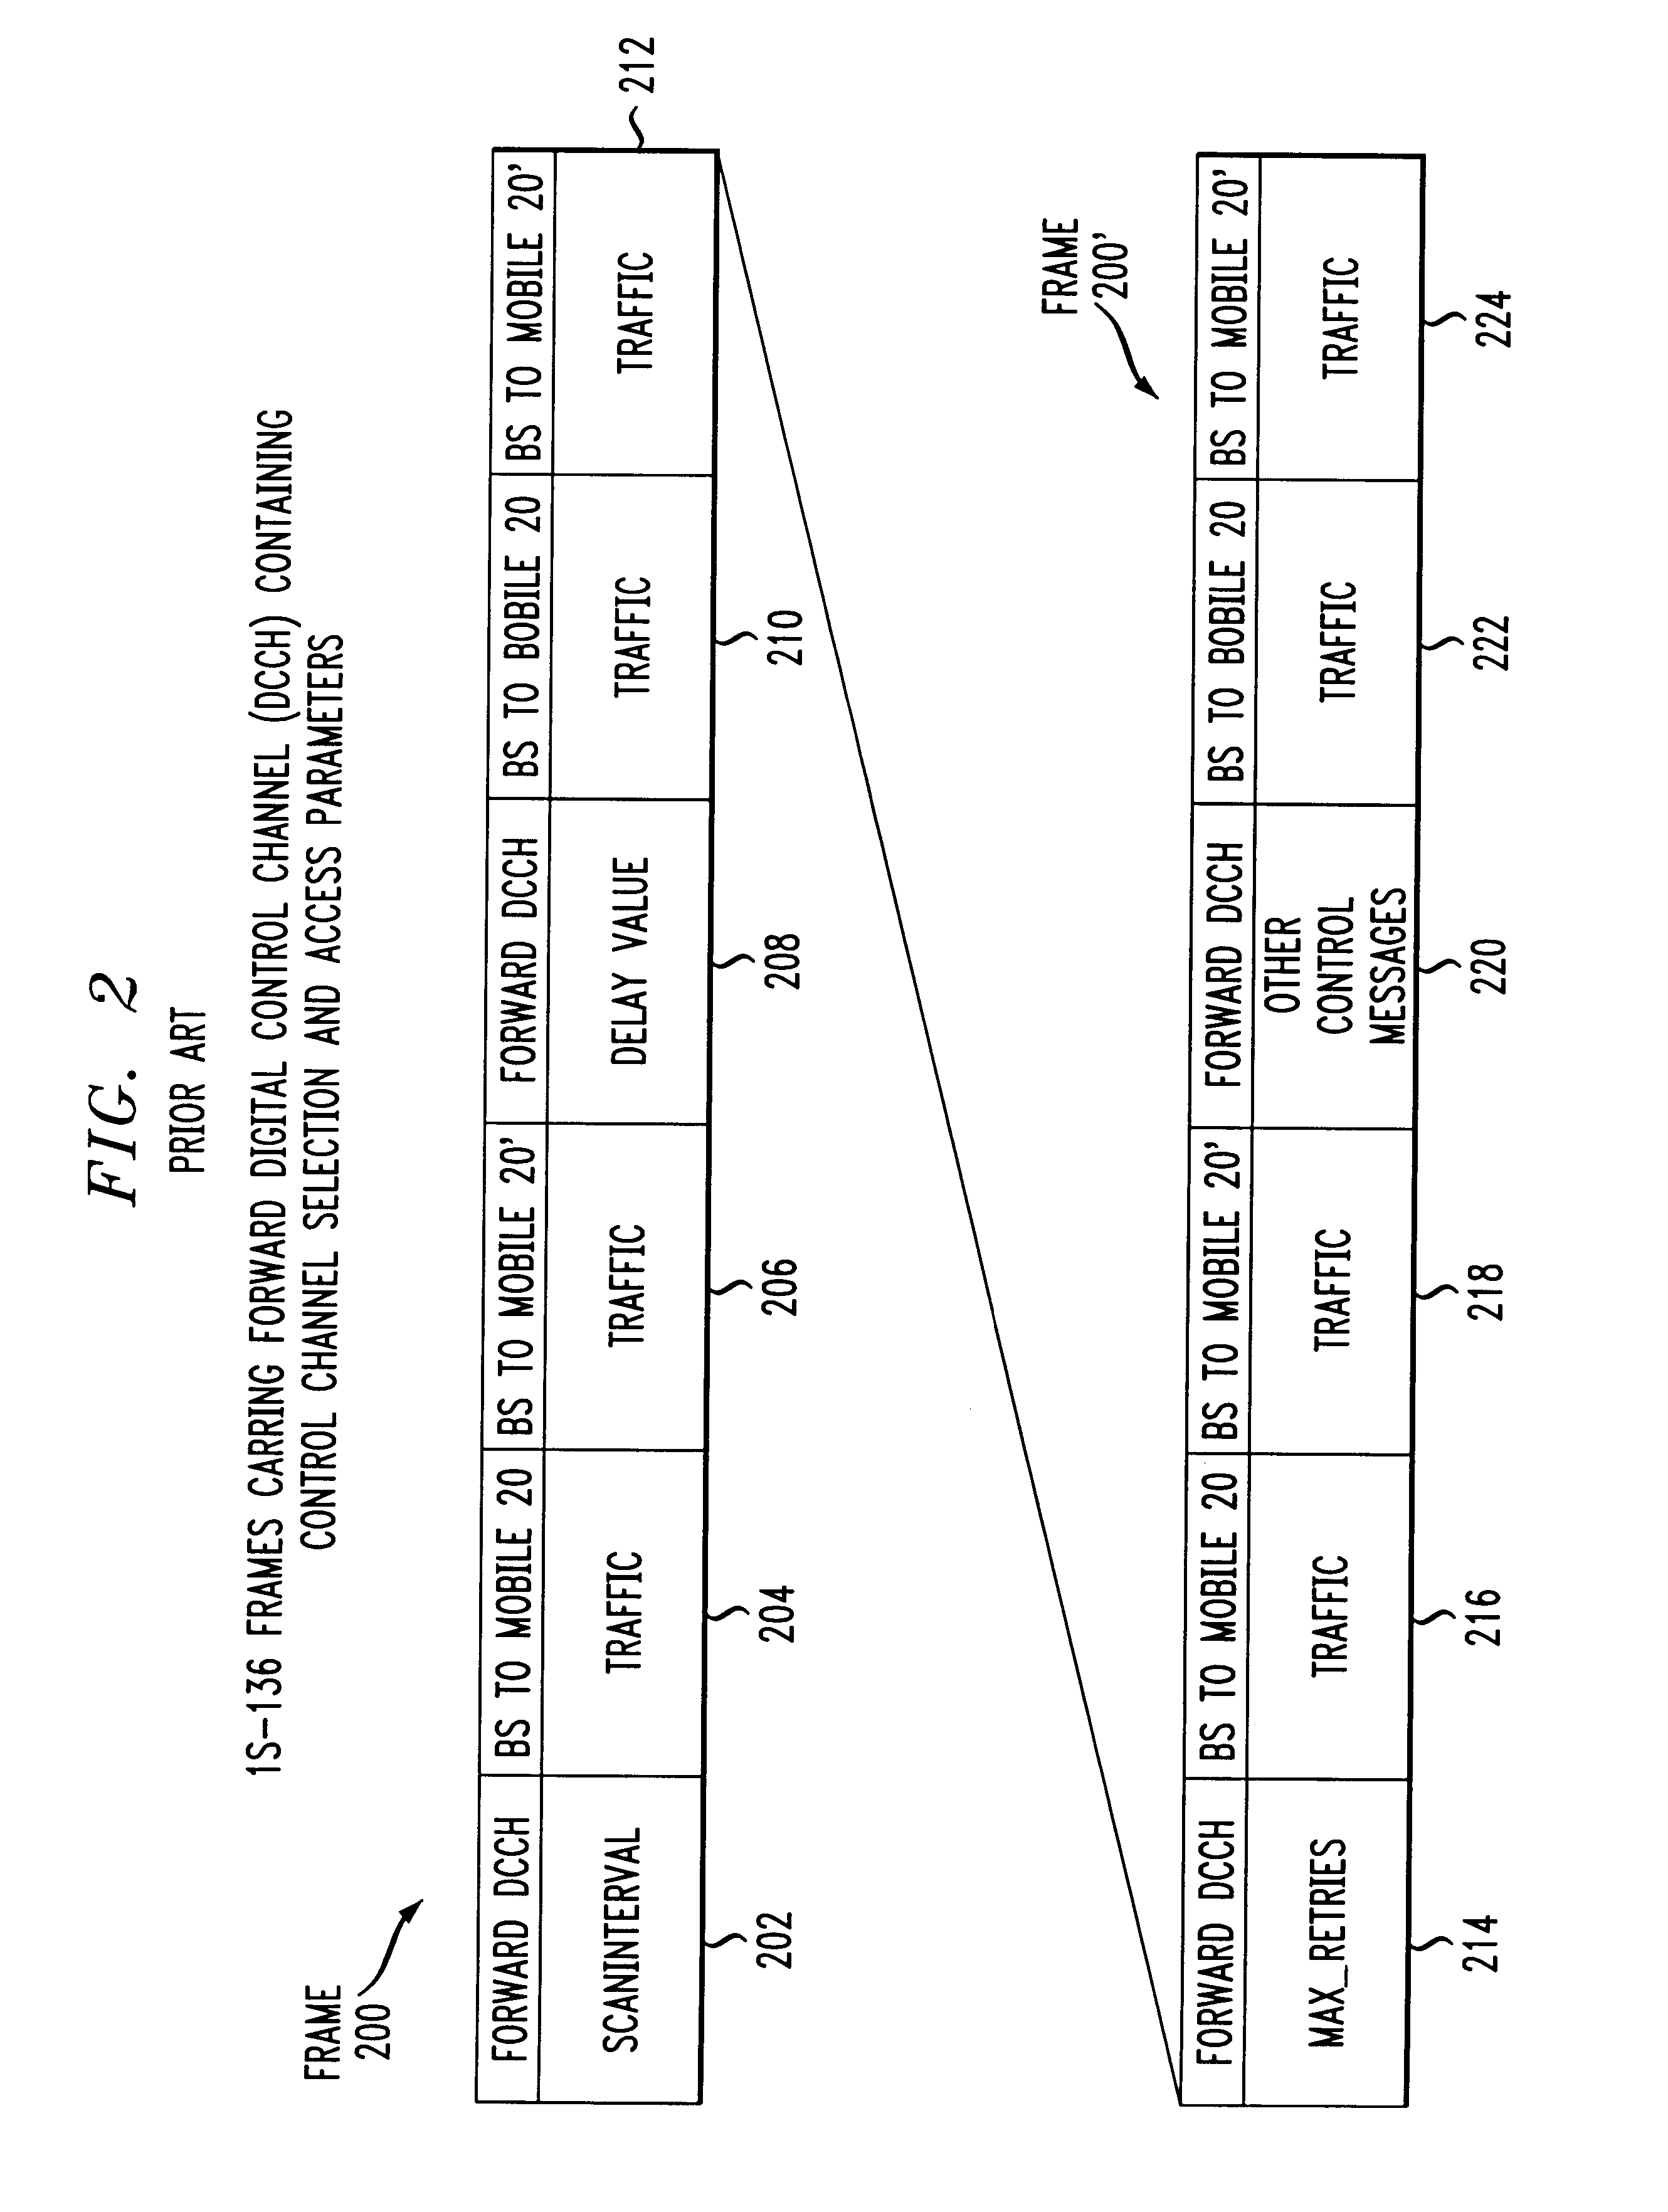 Method for uplink spectrum monitoring for sparse overlay TDMA systems